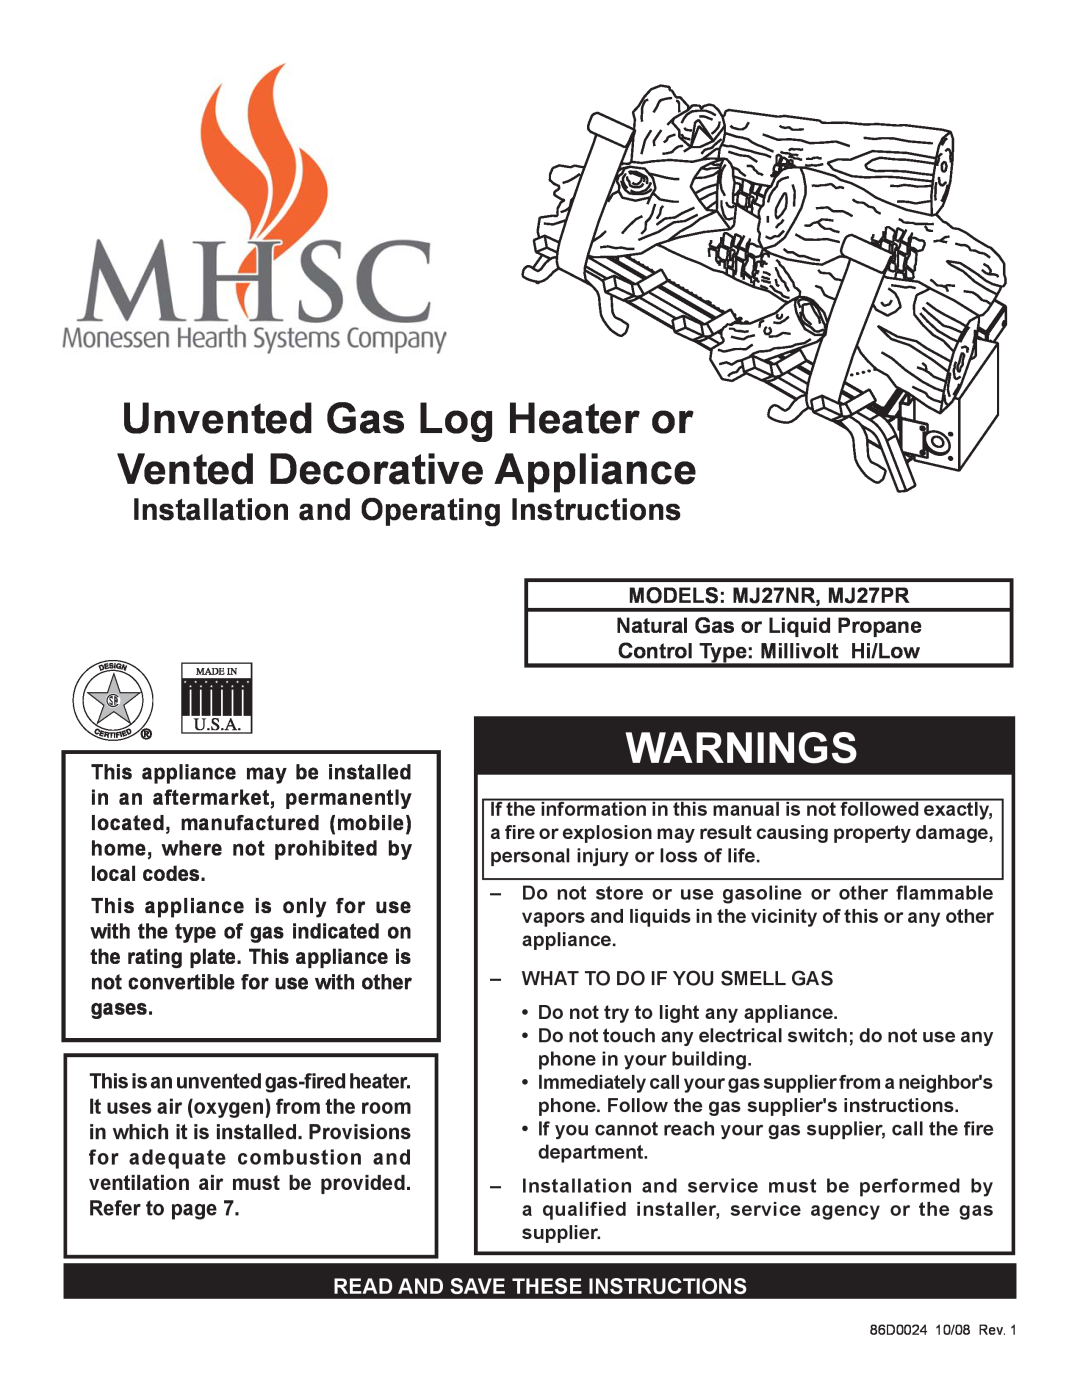 Monessen Hearth MJ27PR operating instructions Installation and Operating Instructions, Read And Save These Instructions 